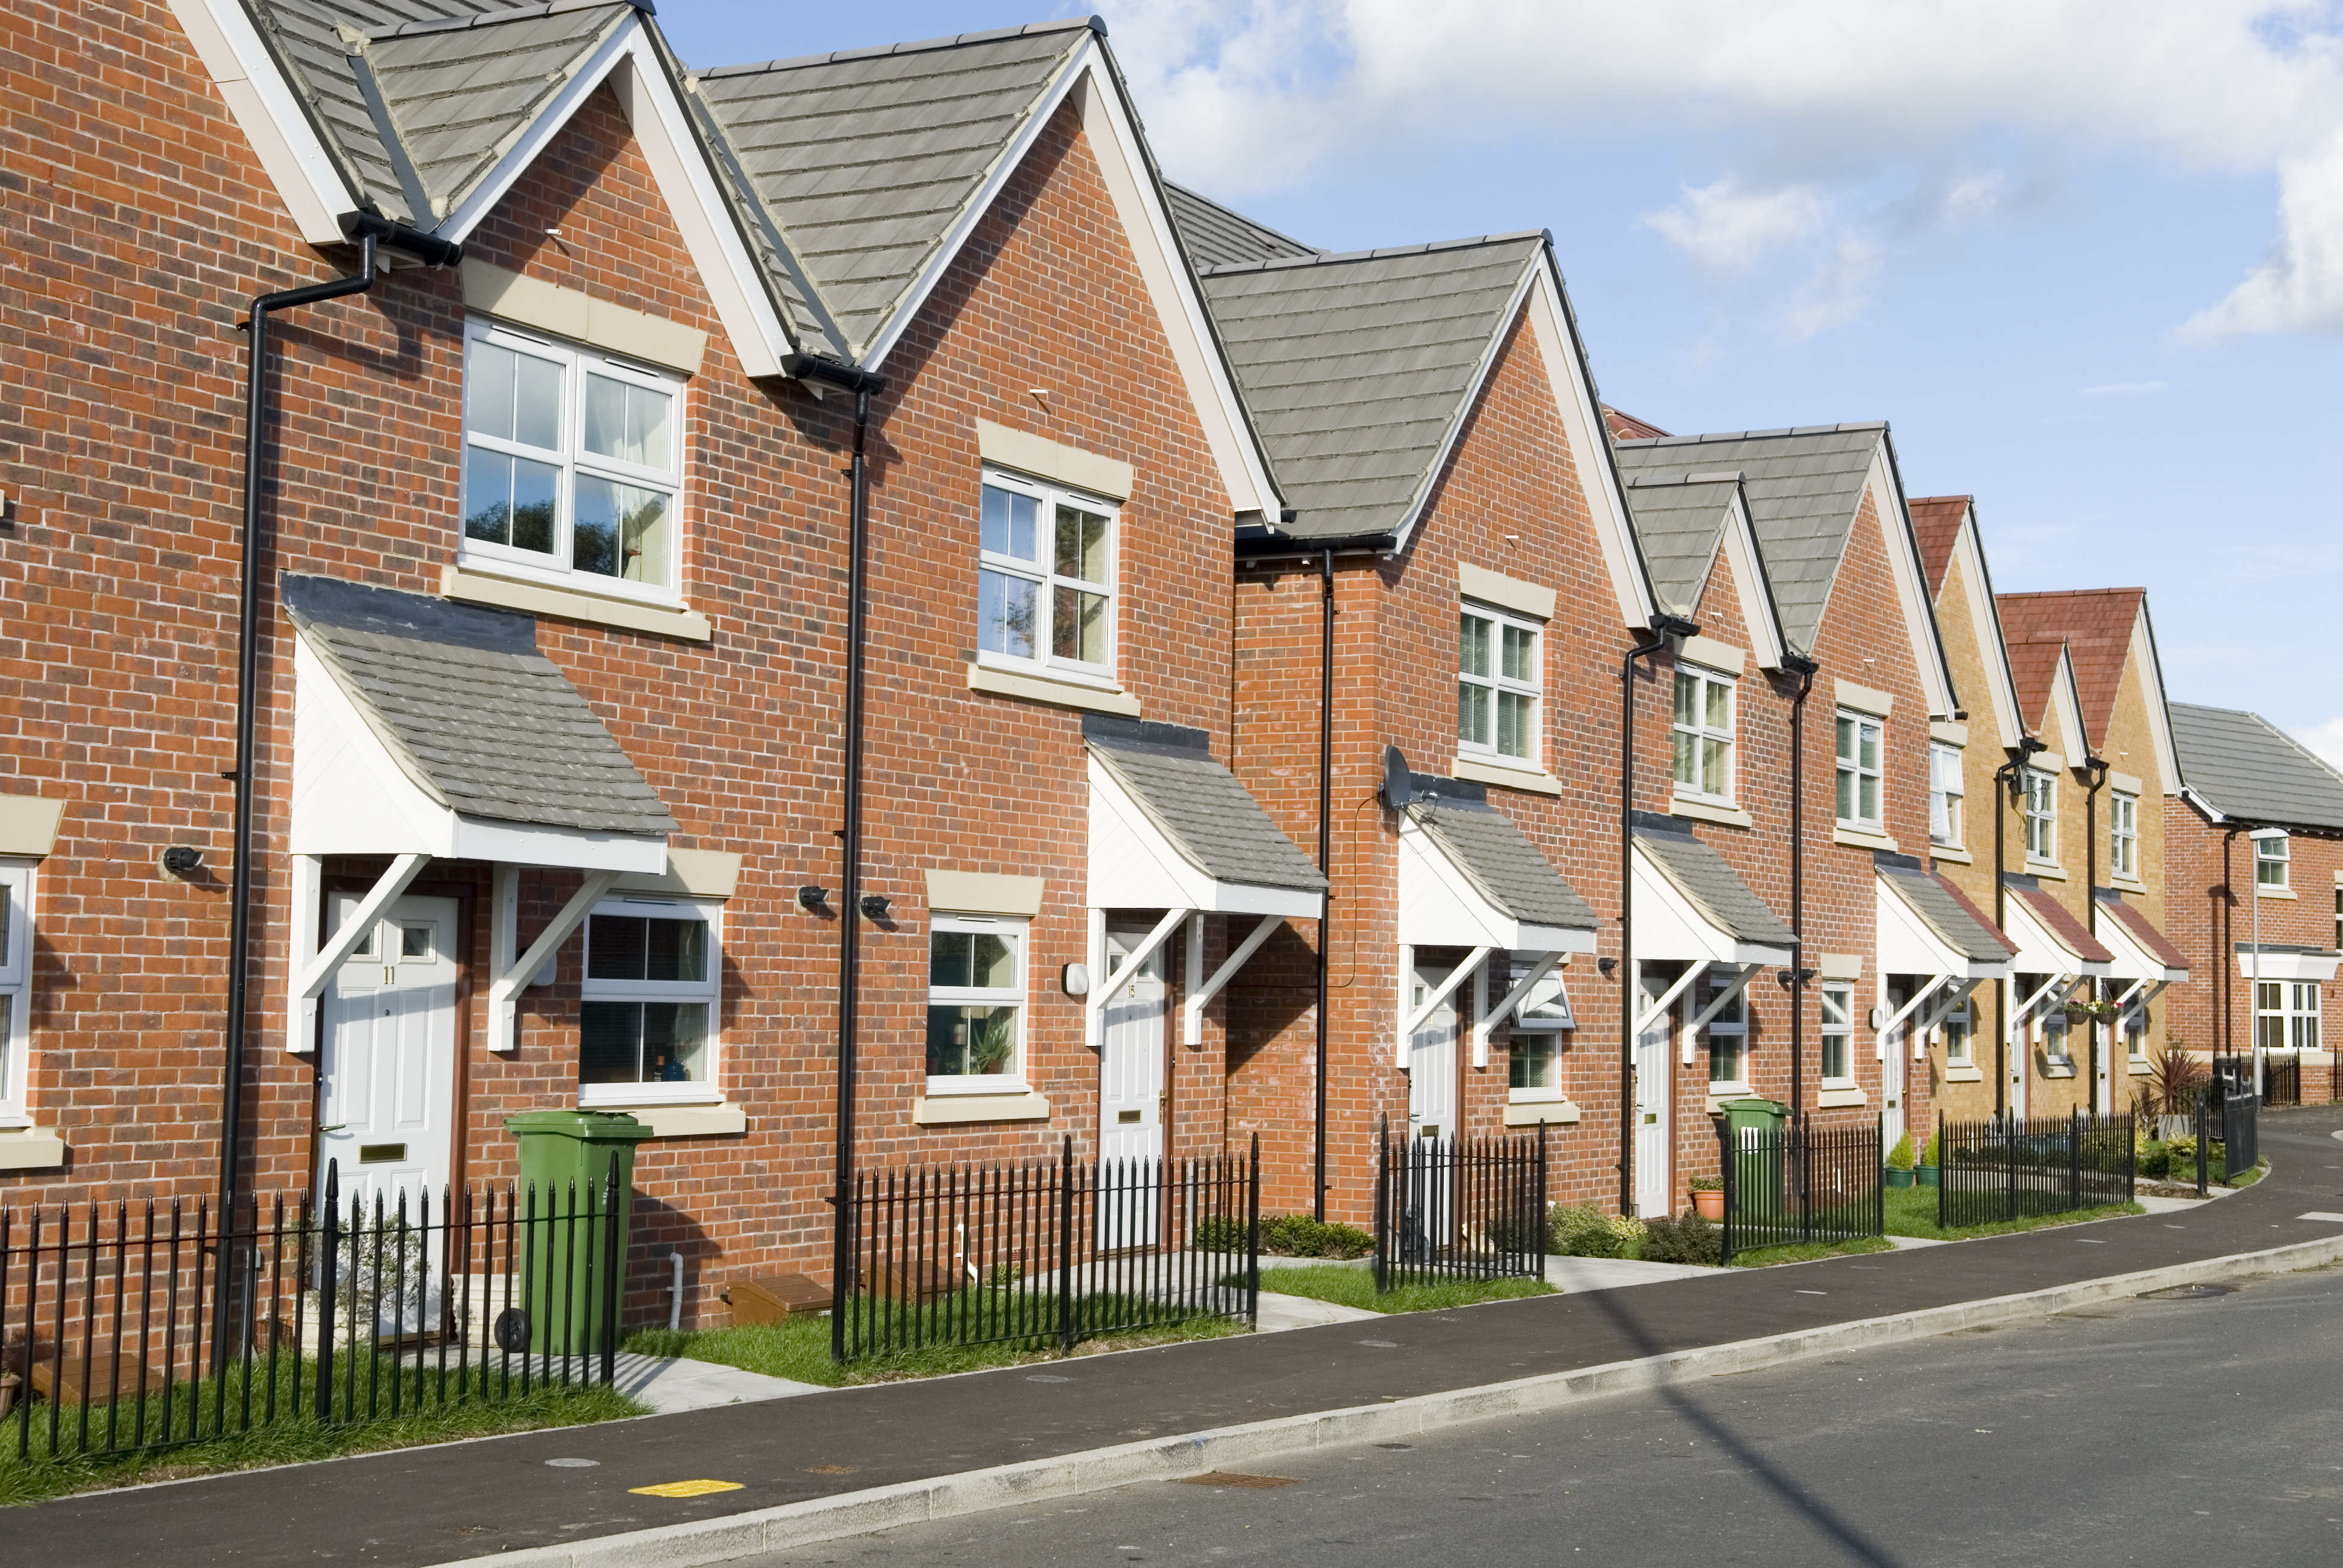 Inflation falls - but what does it mean for the housing market?